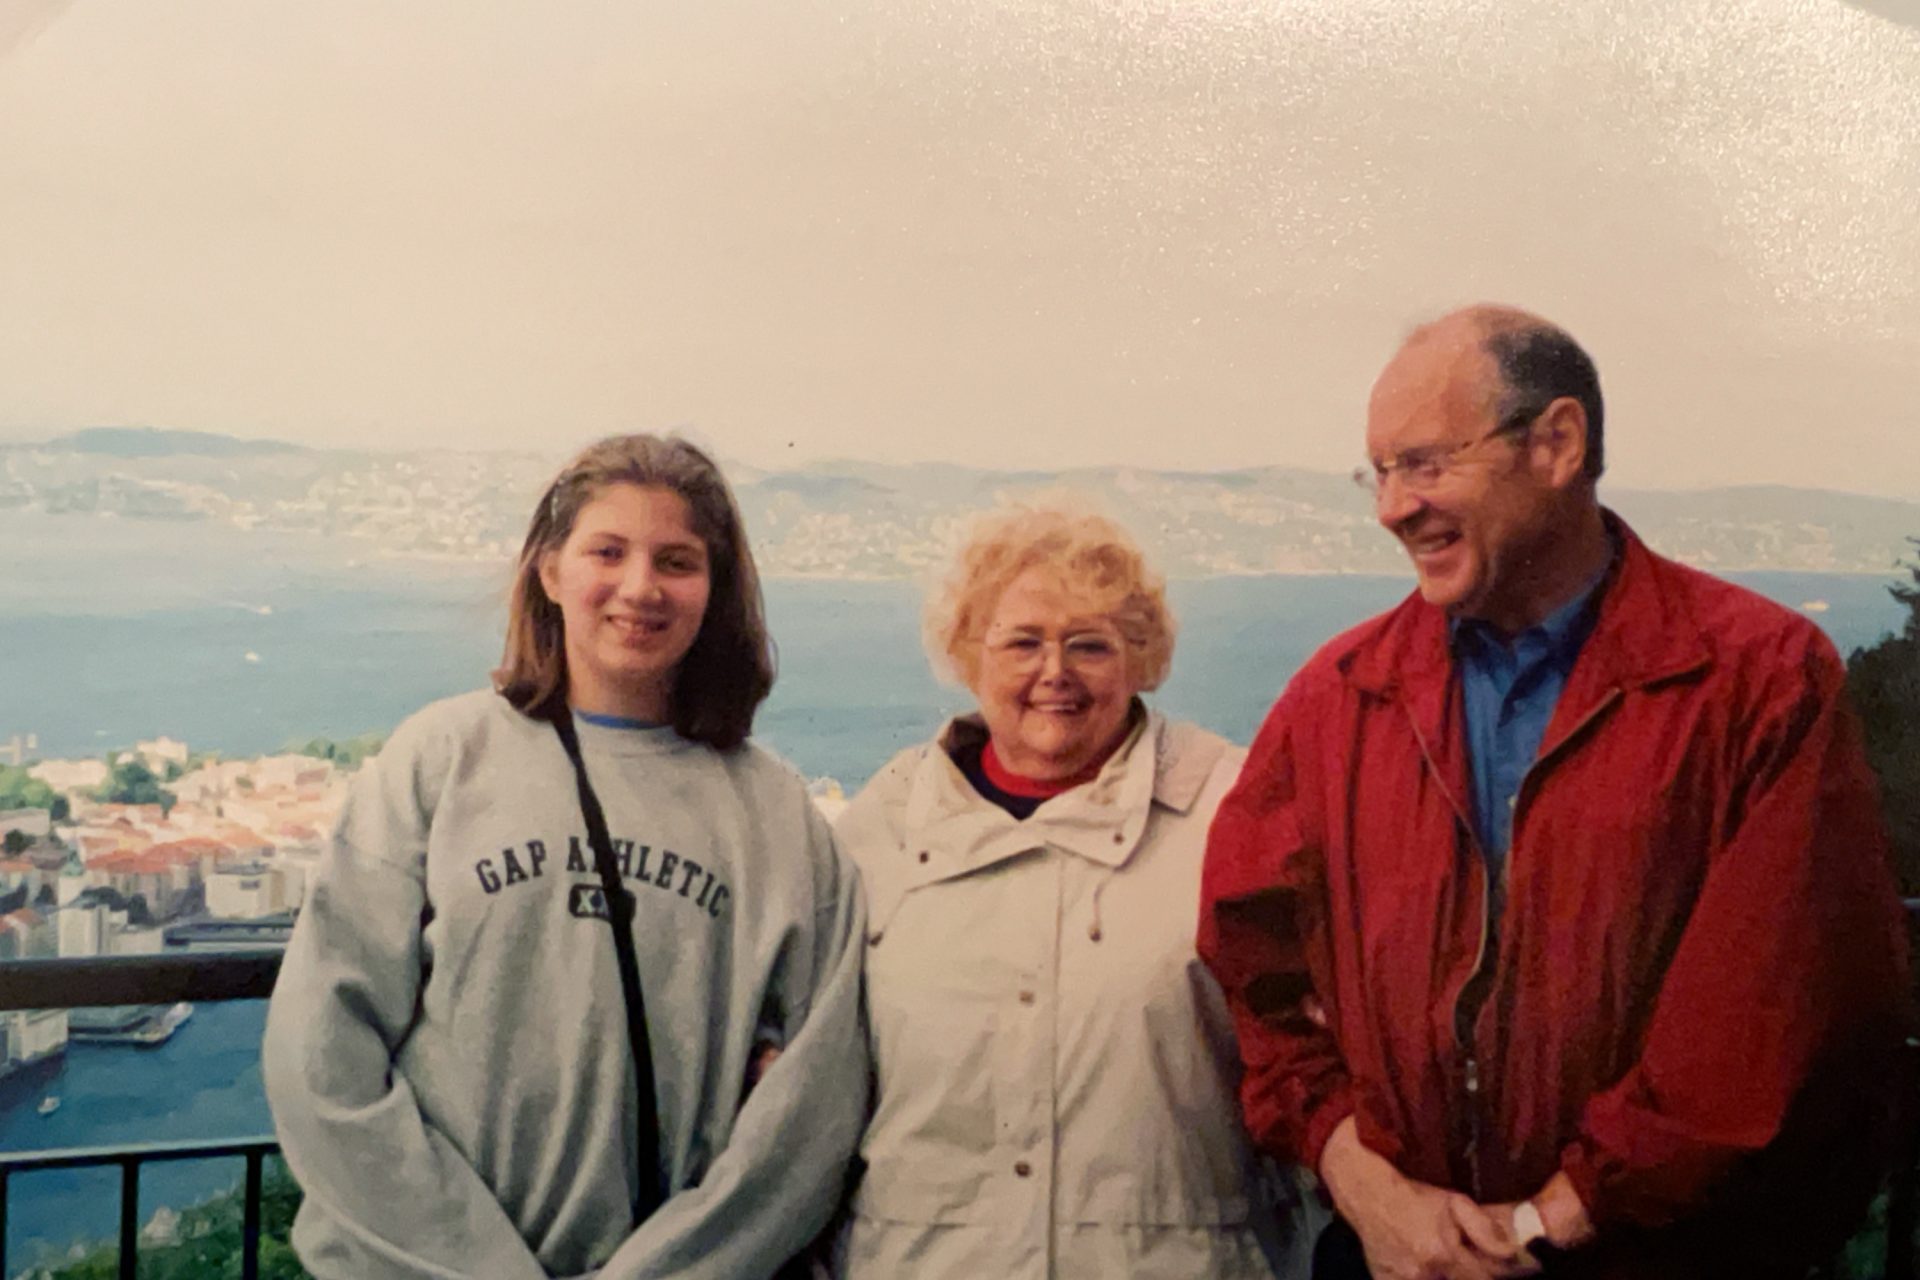 Grandma, our cousin, and myself in Bergen, Norway. I am so fortunate to have had this amazing experience with her and Pappy.